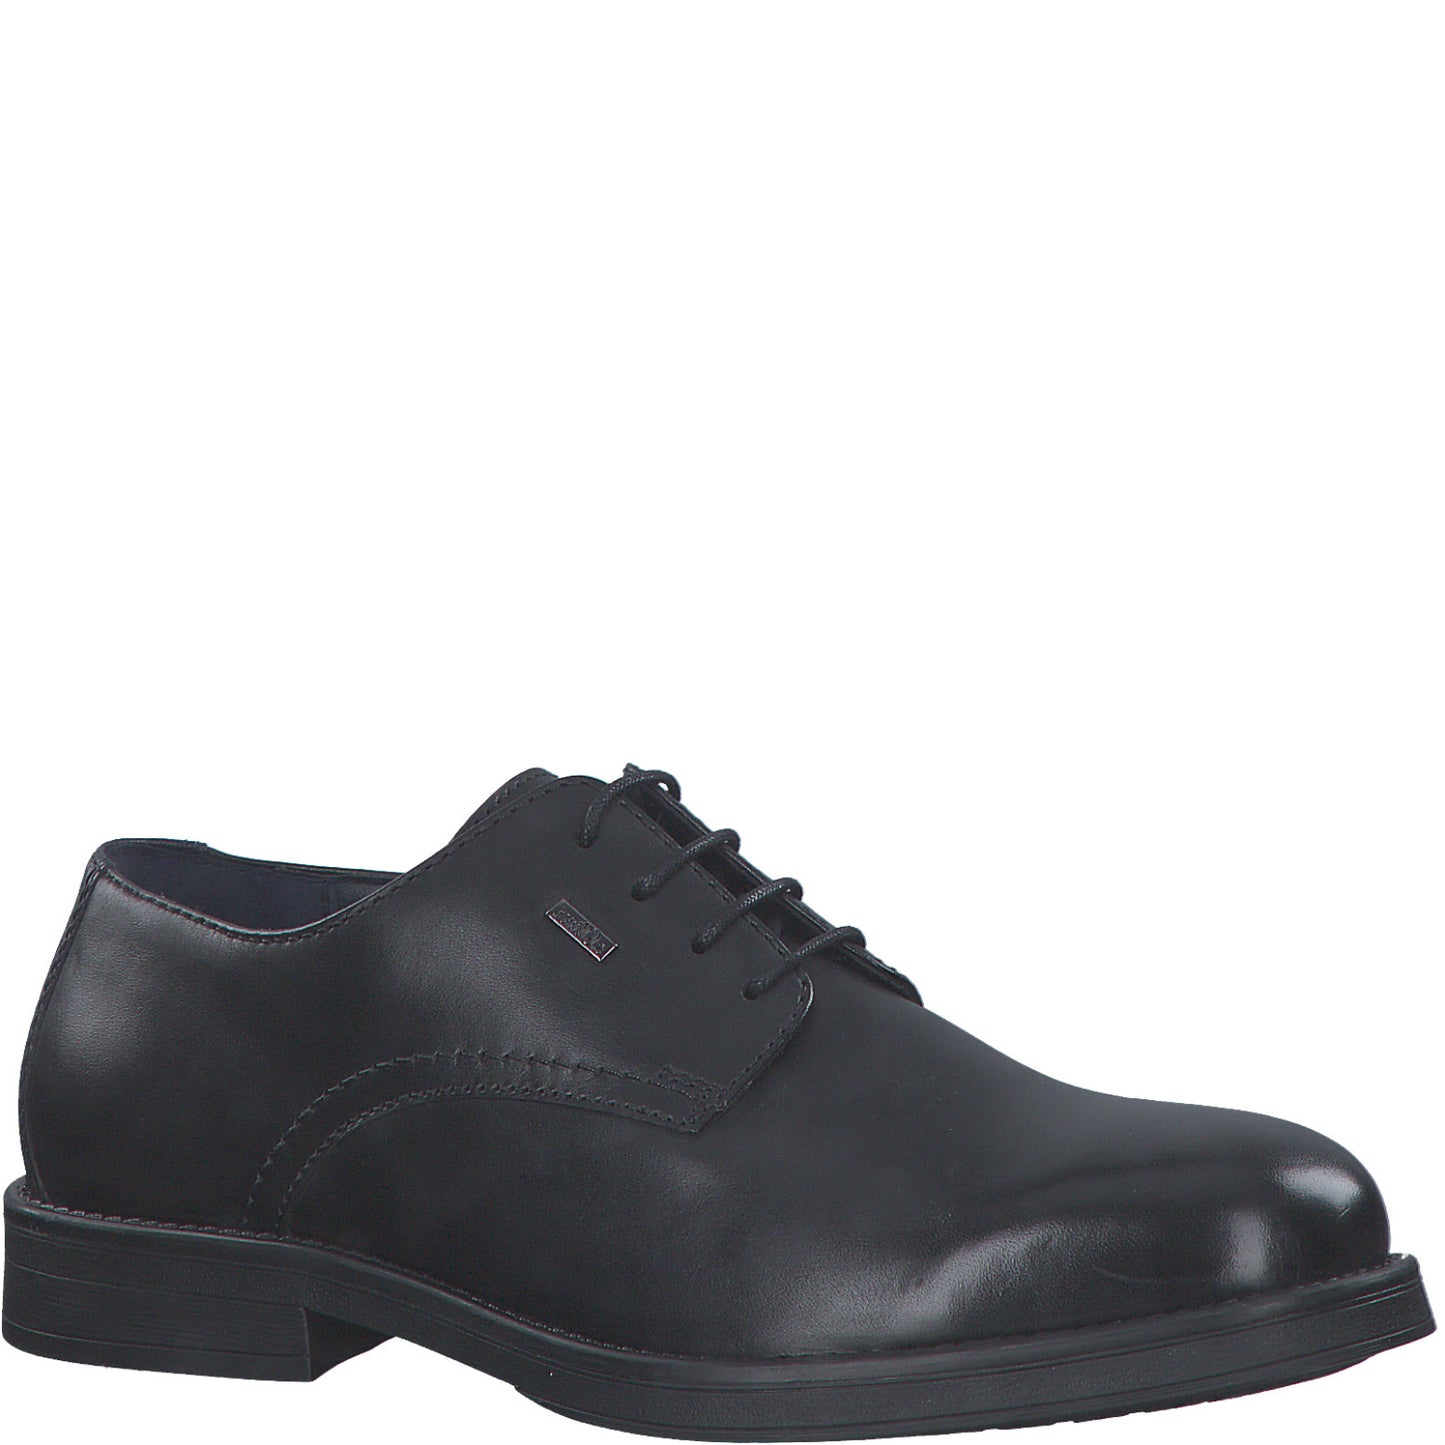 S Oliver 5-5-13200-39 001 Black Casual Shoes